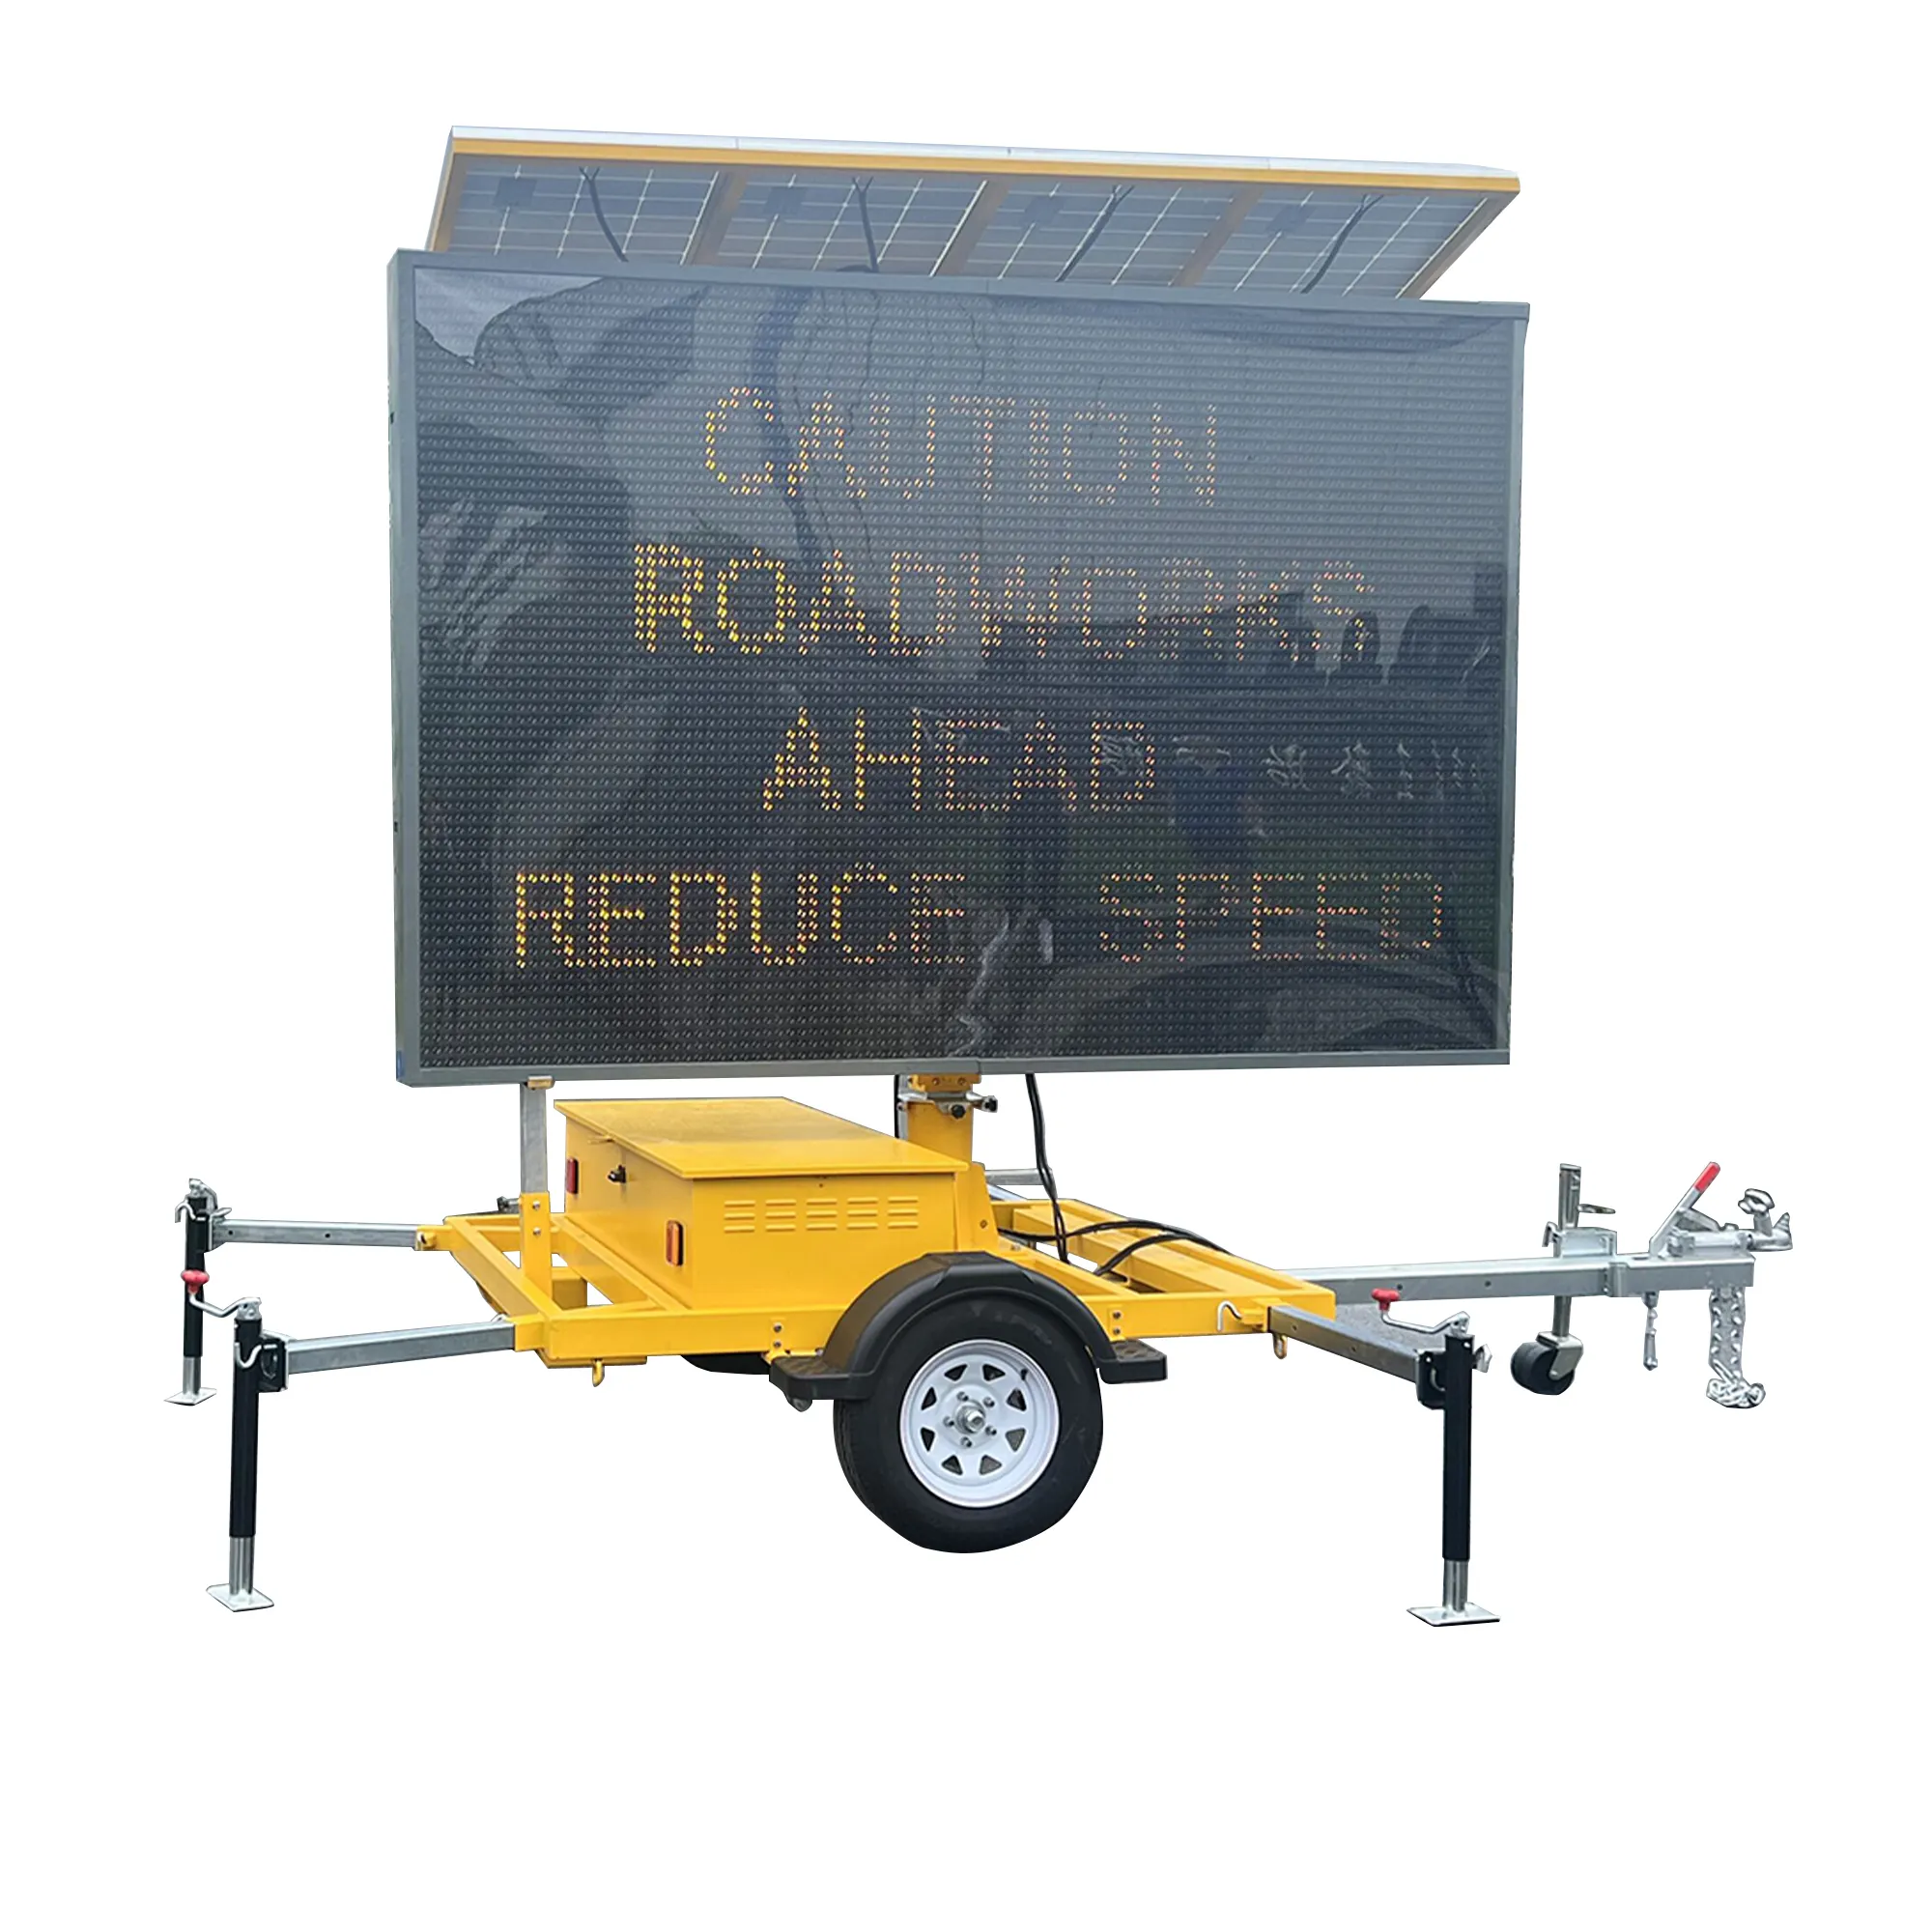 Outdoor Variable Message Signs Mobile Led Screen Board Dynamic Message Signs Display ADVERTISEMENT TRAILER